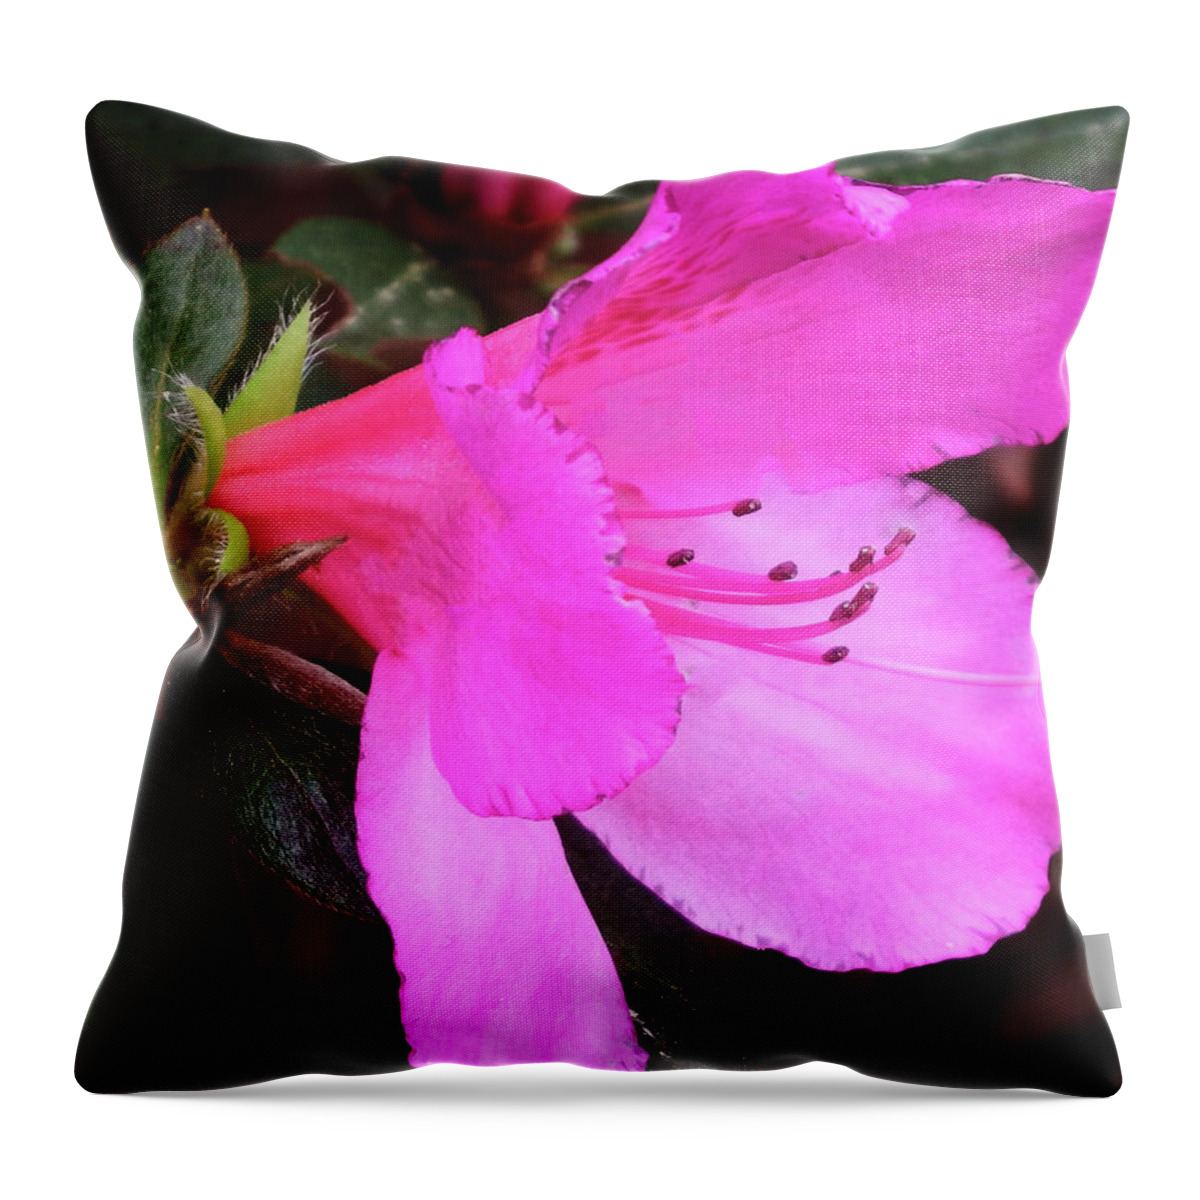 Beautiful Throw Pillow featuring the photograph Azalea 2018 by Cathy Harper